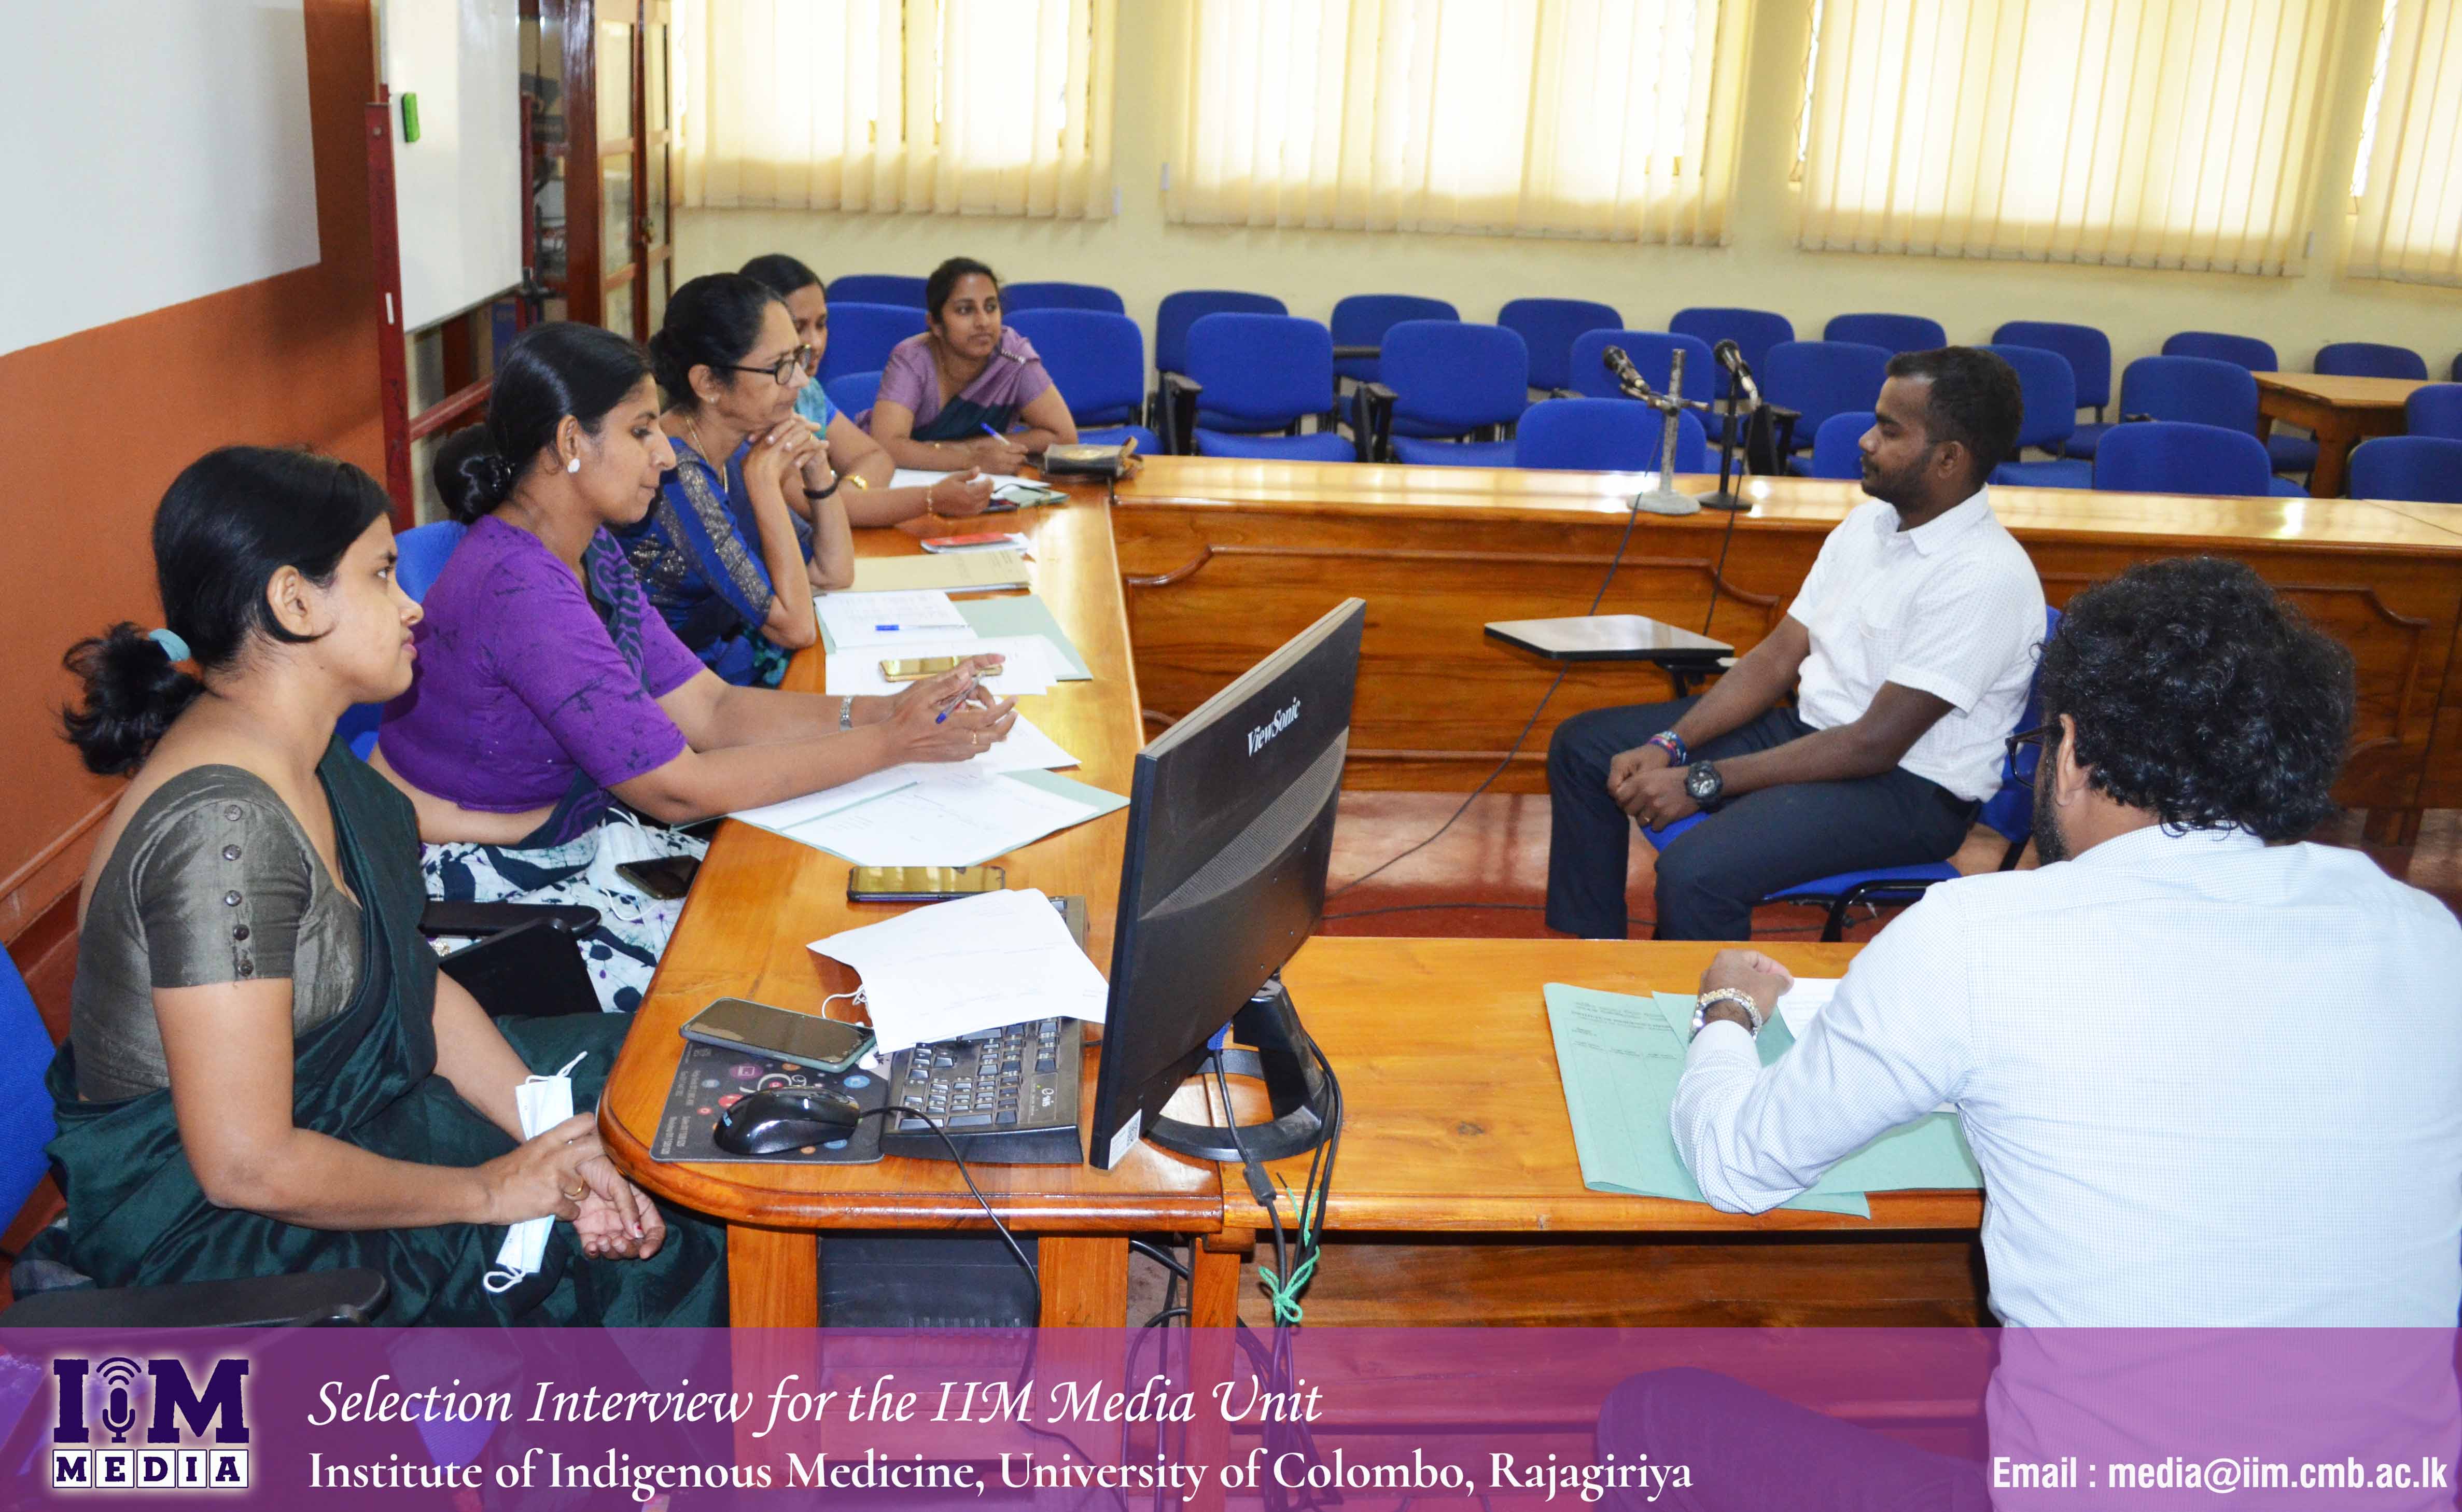 Students Selection Interview for the IIM Media Unit